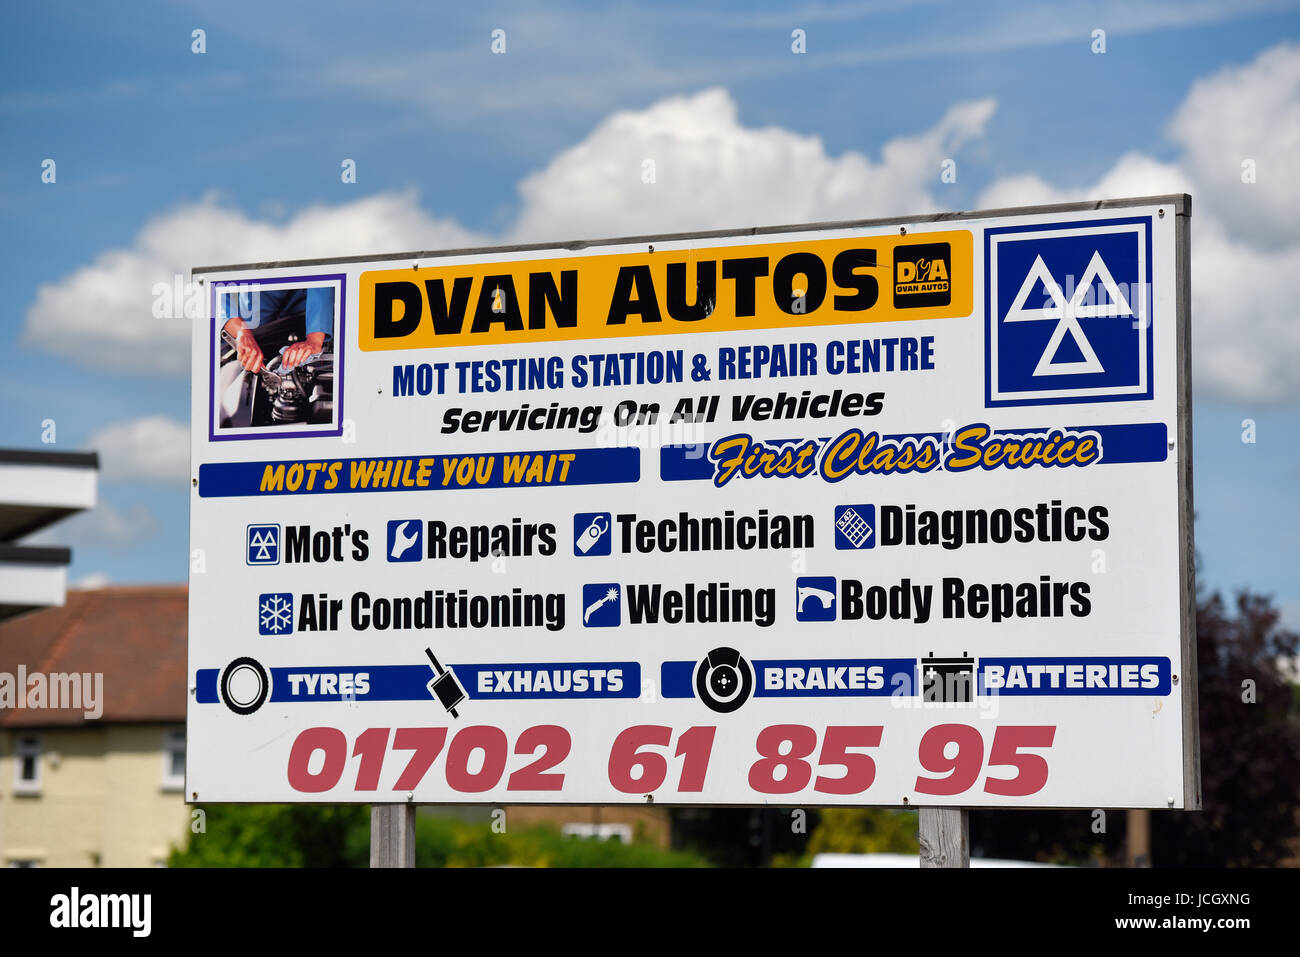 Dvan autos mot testing station & repair centre in Sutton Road, Southend on Sea, Essex. Sign board Stock Photo